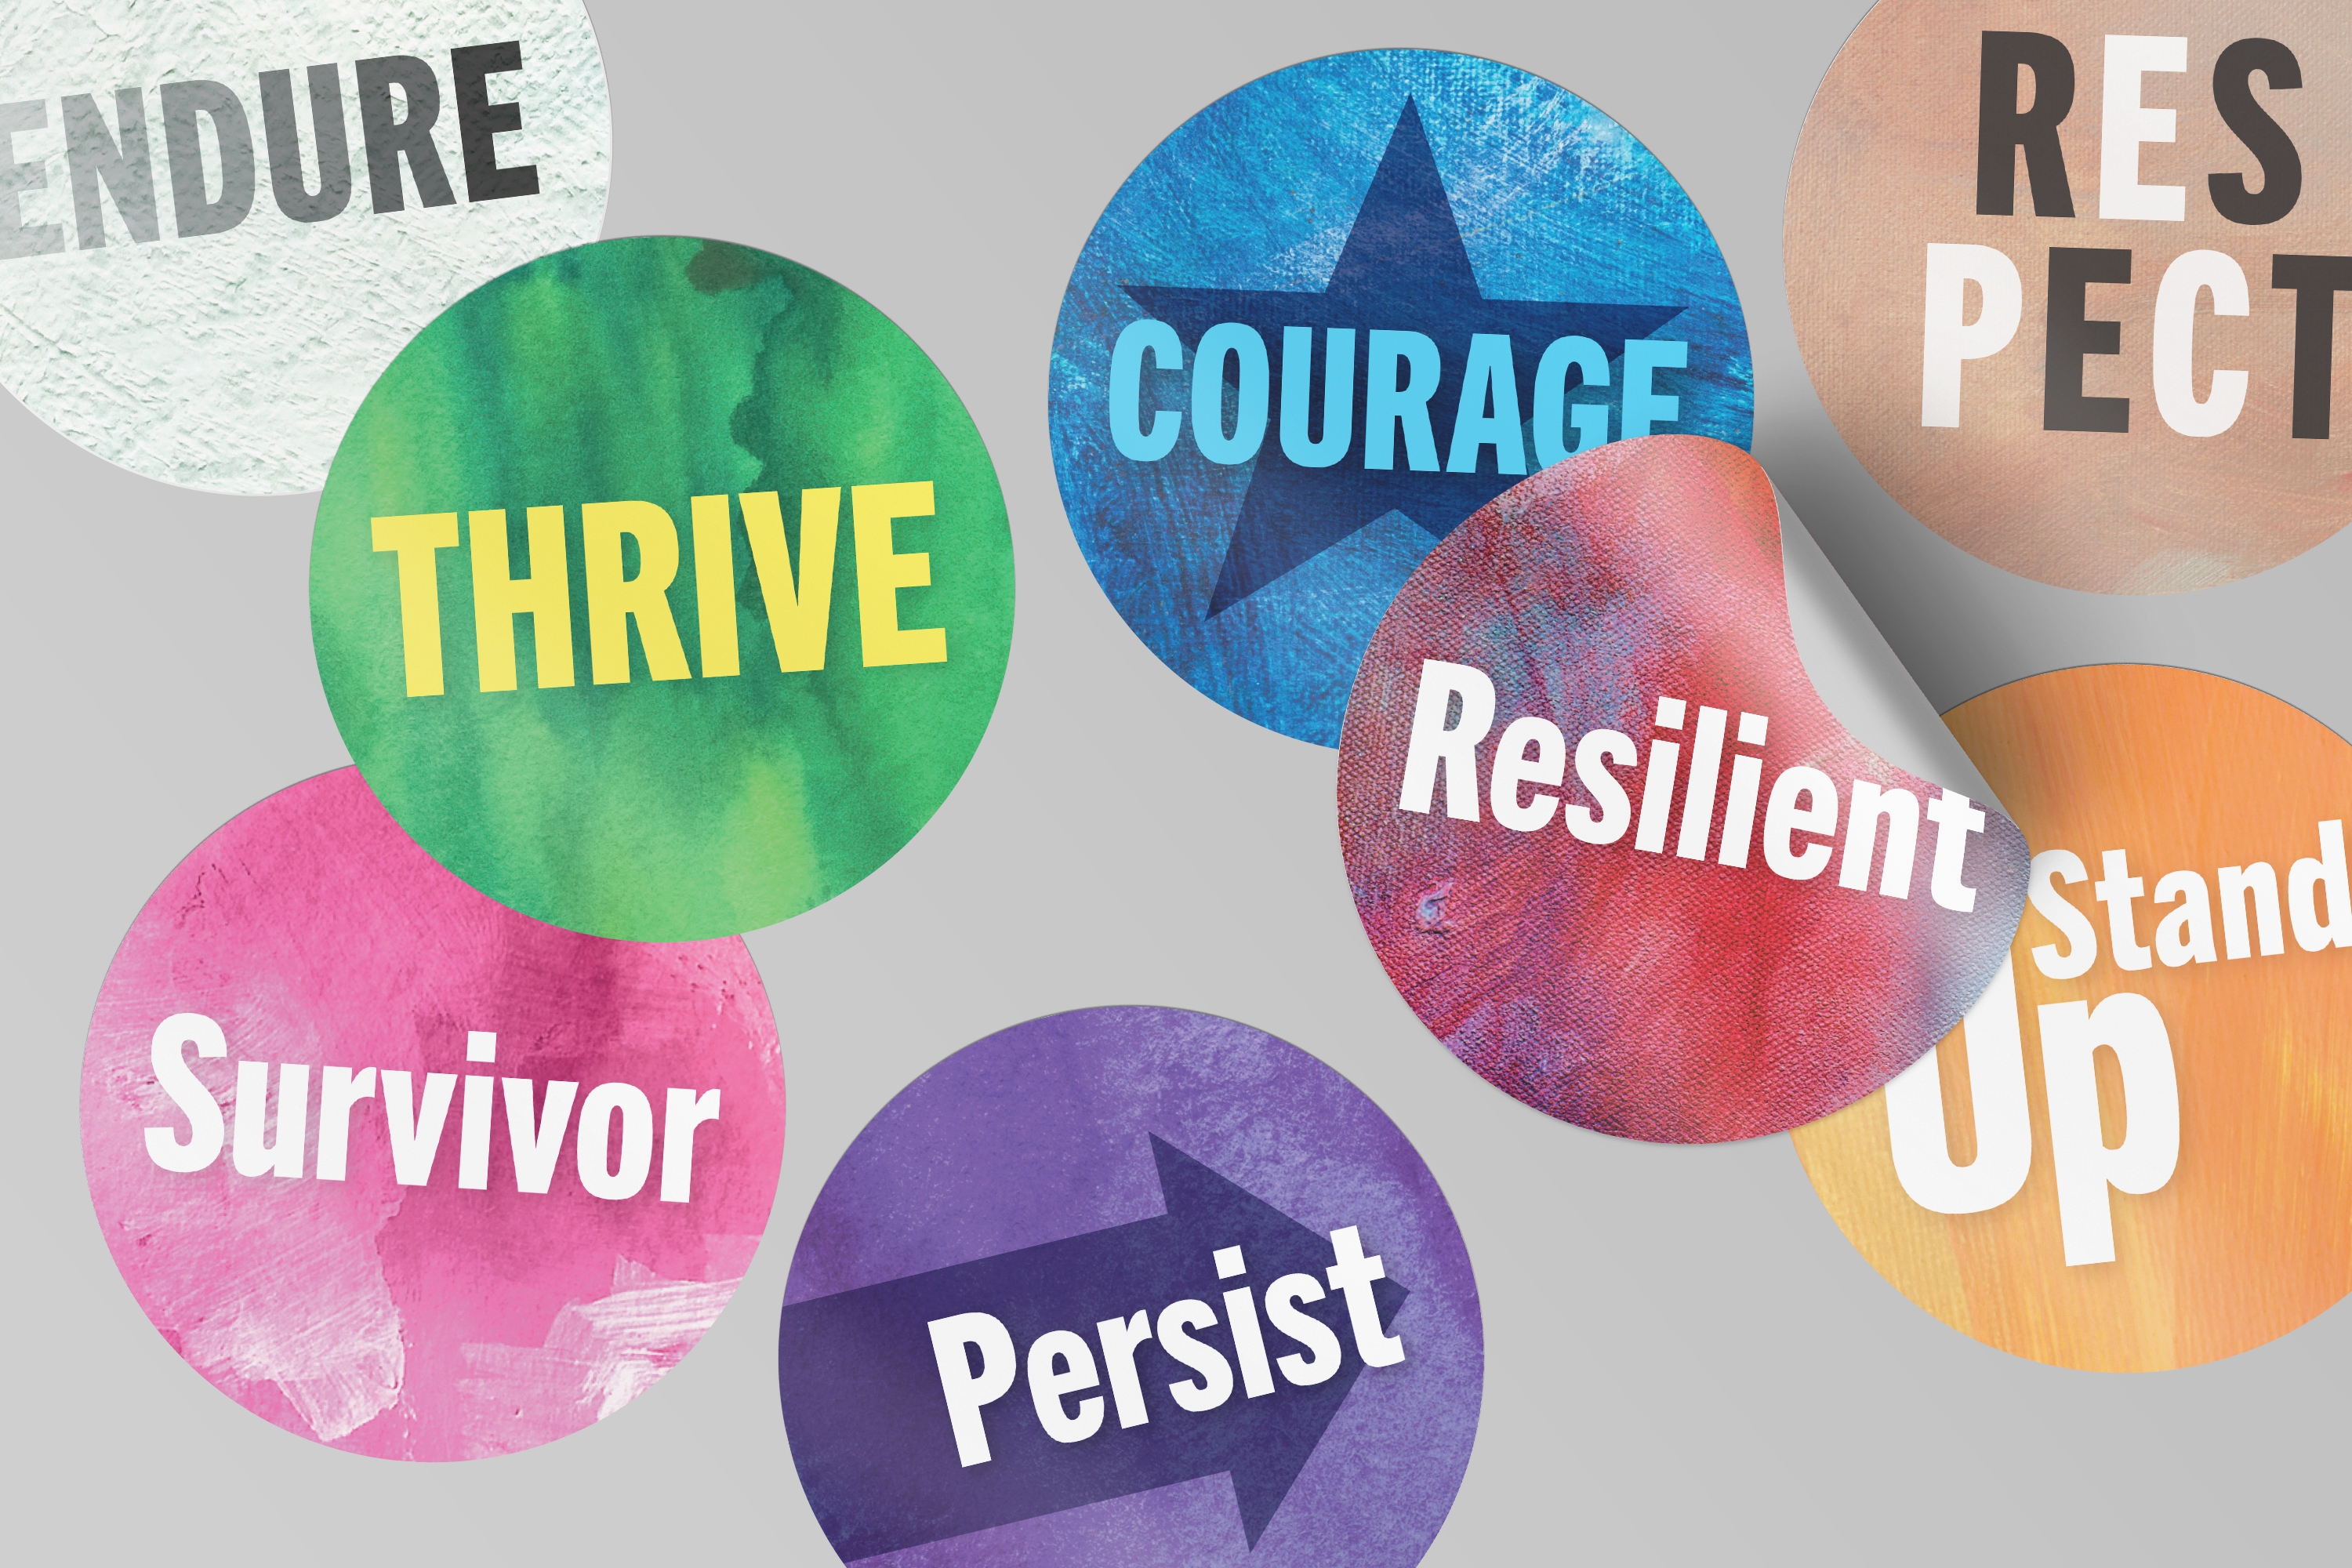 A collection of stickers from The Progressive Corporation Annual Report 2020, reading messages such as "Thrive," "Resilient," and "Persist."